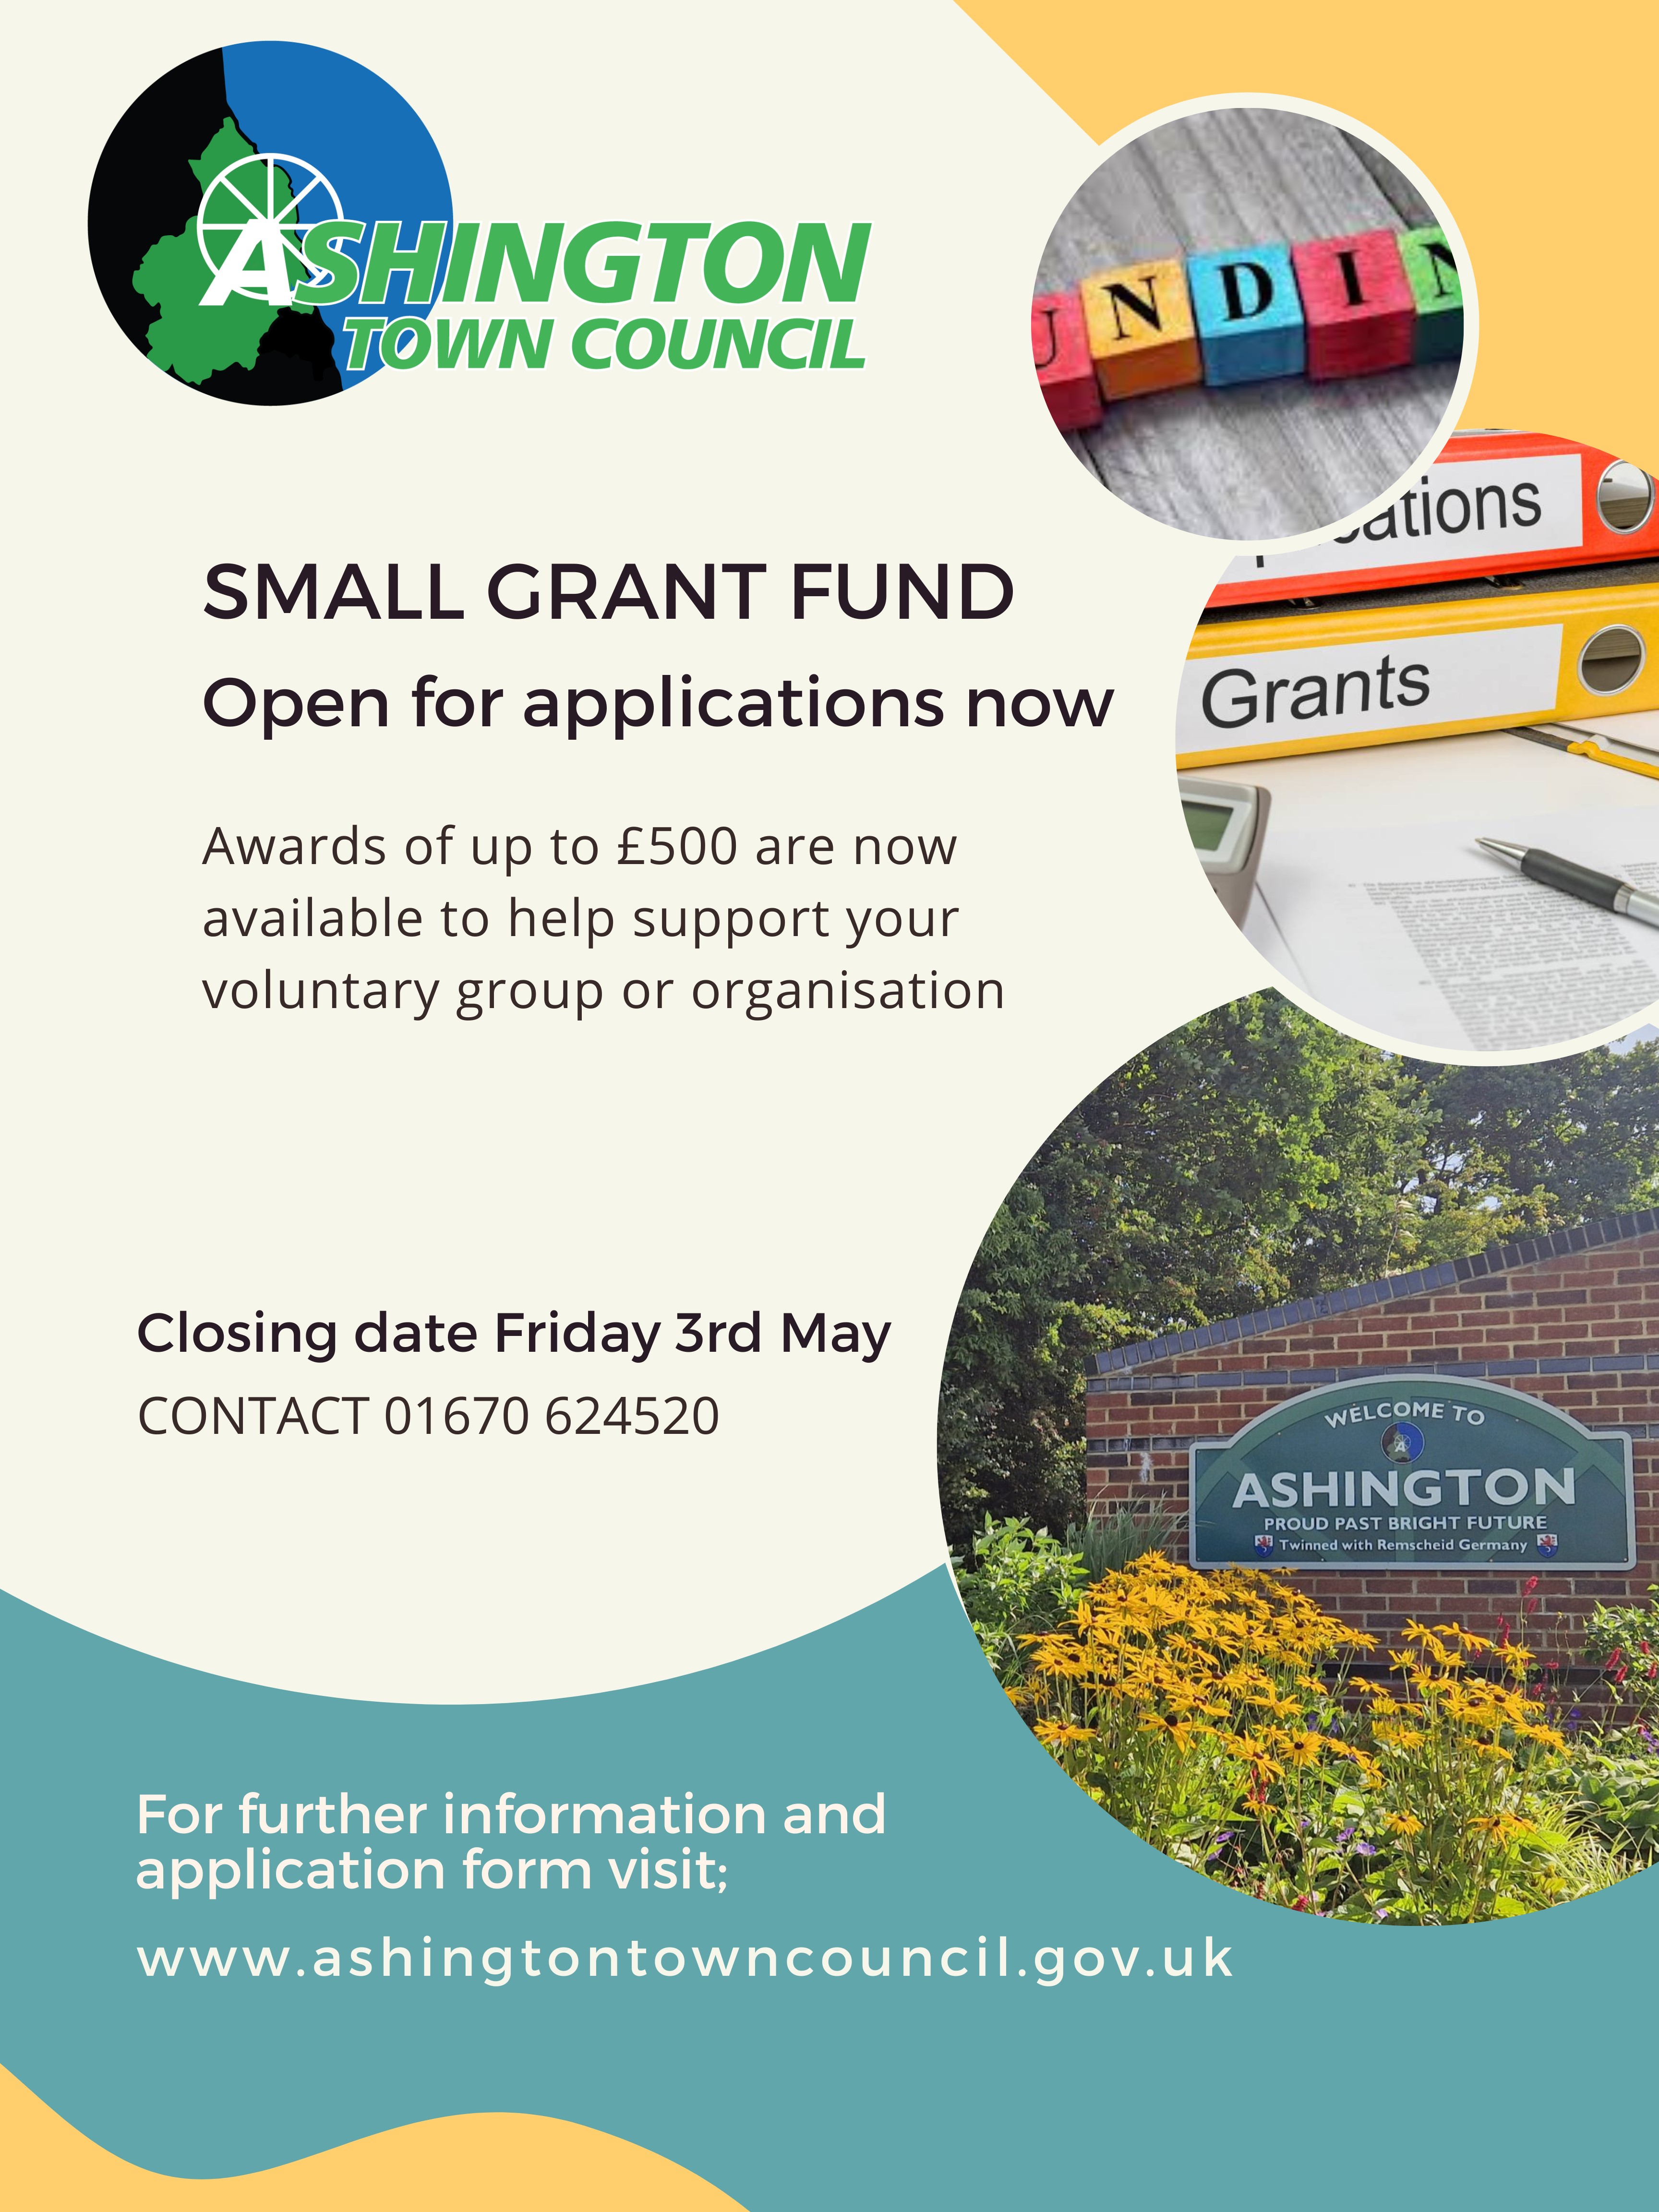 Ashington Town Council's Small Grant Fund Open for First Round of Applications